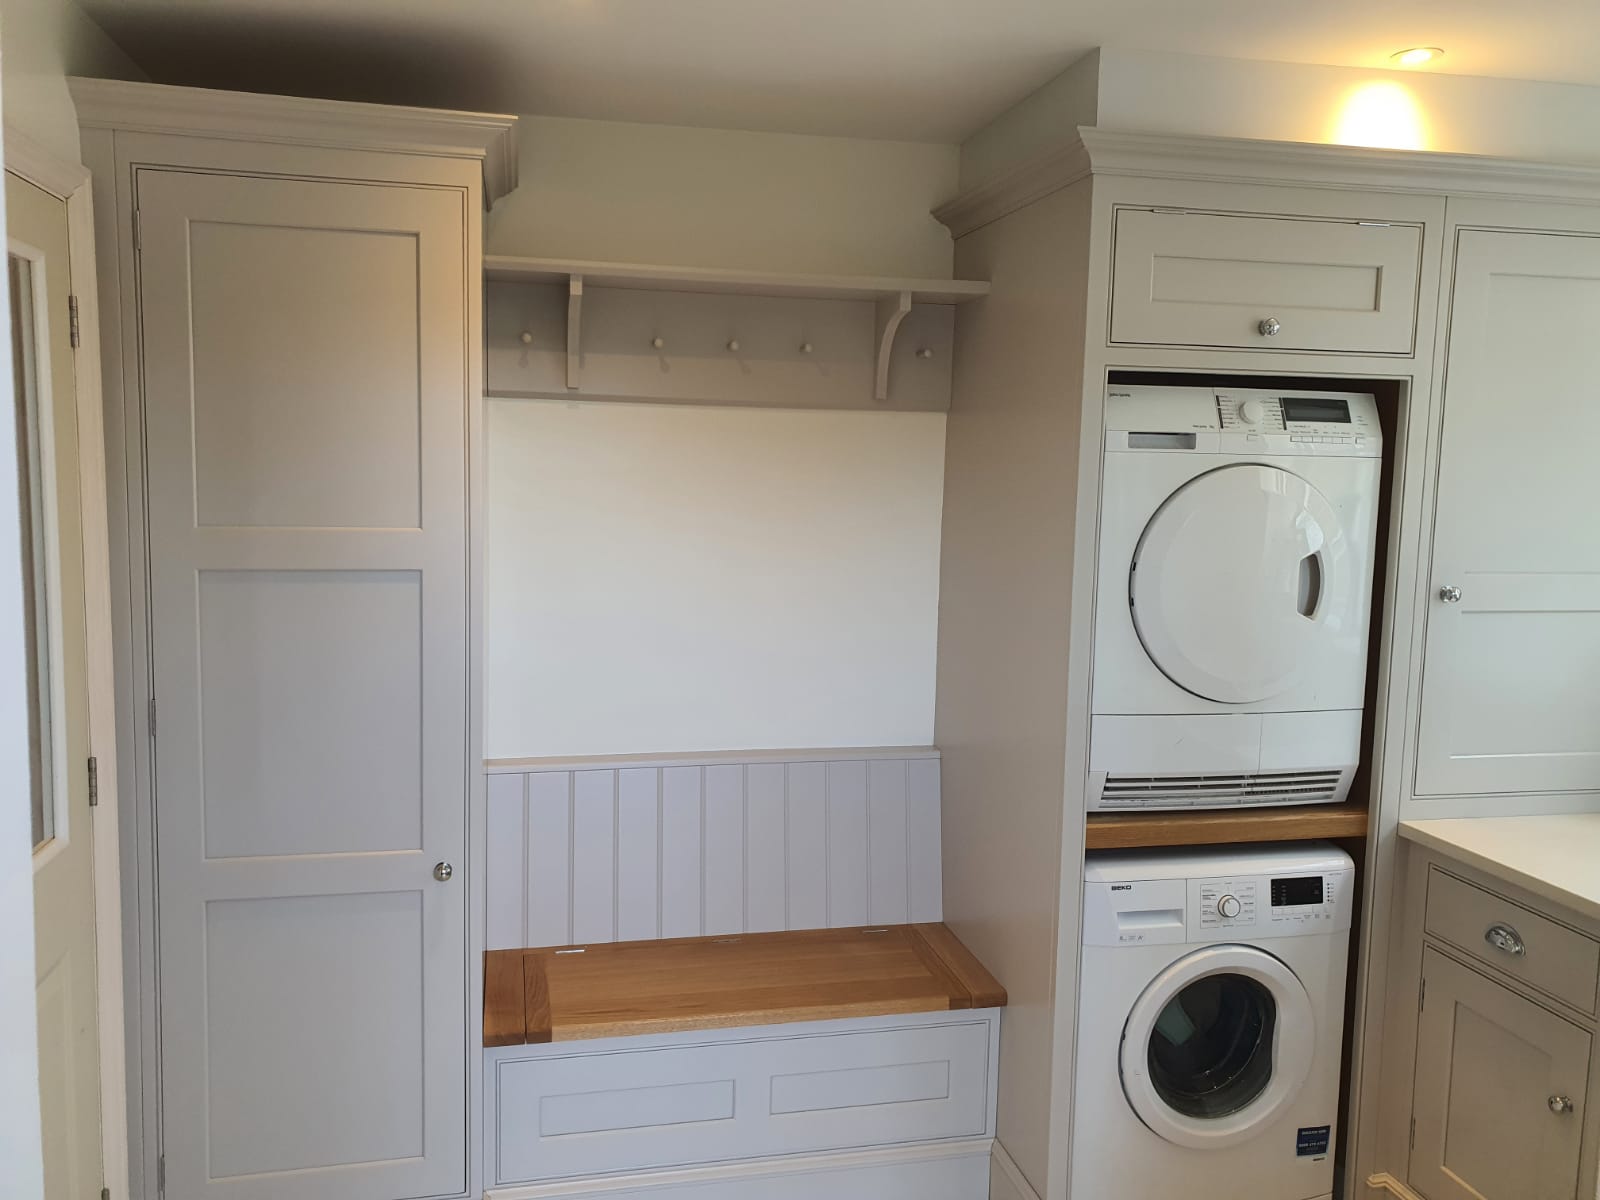 The Importance of a good Utility Room Design